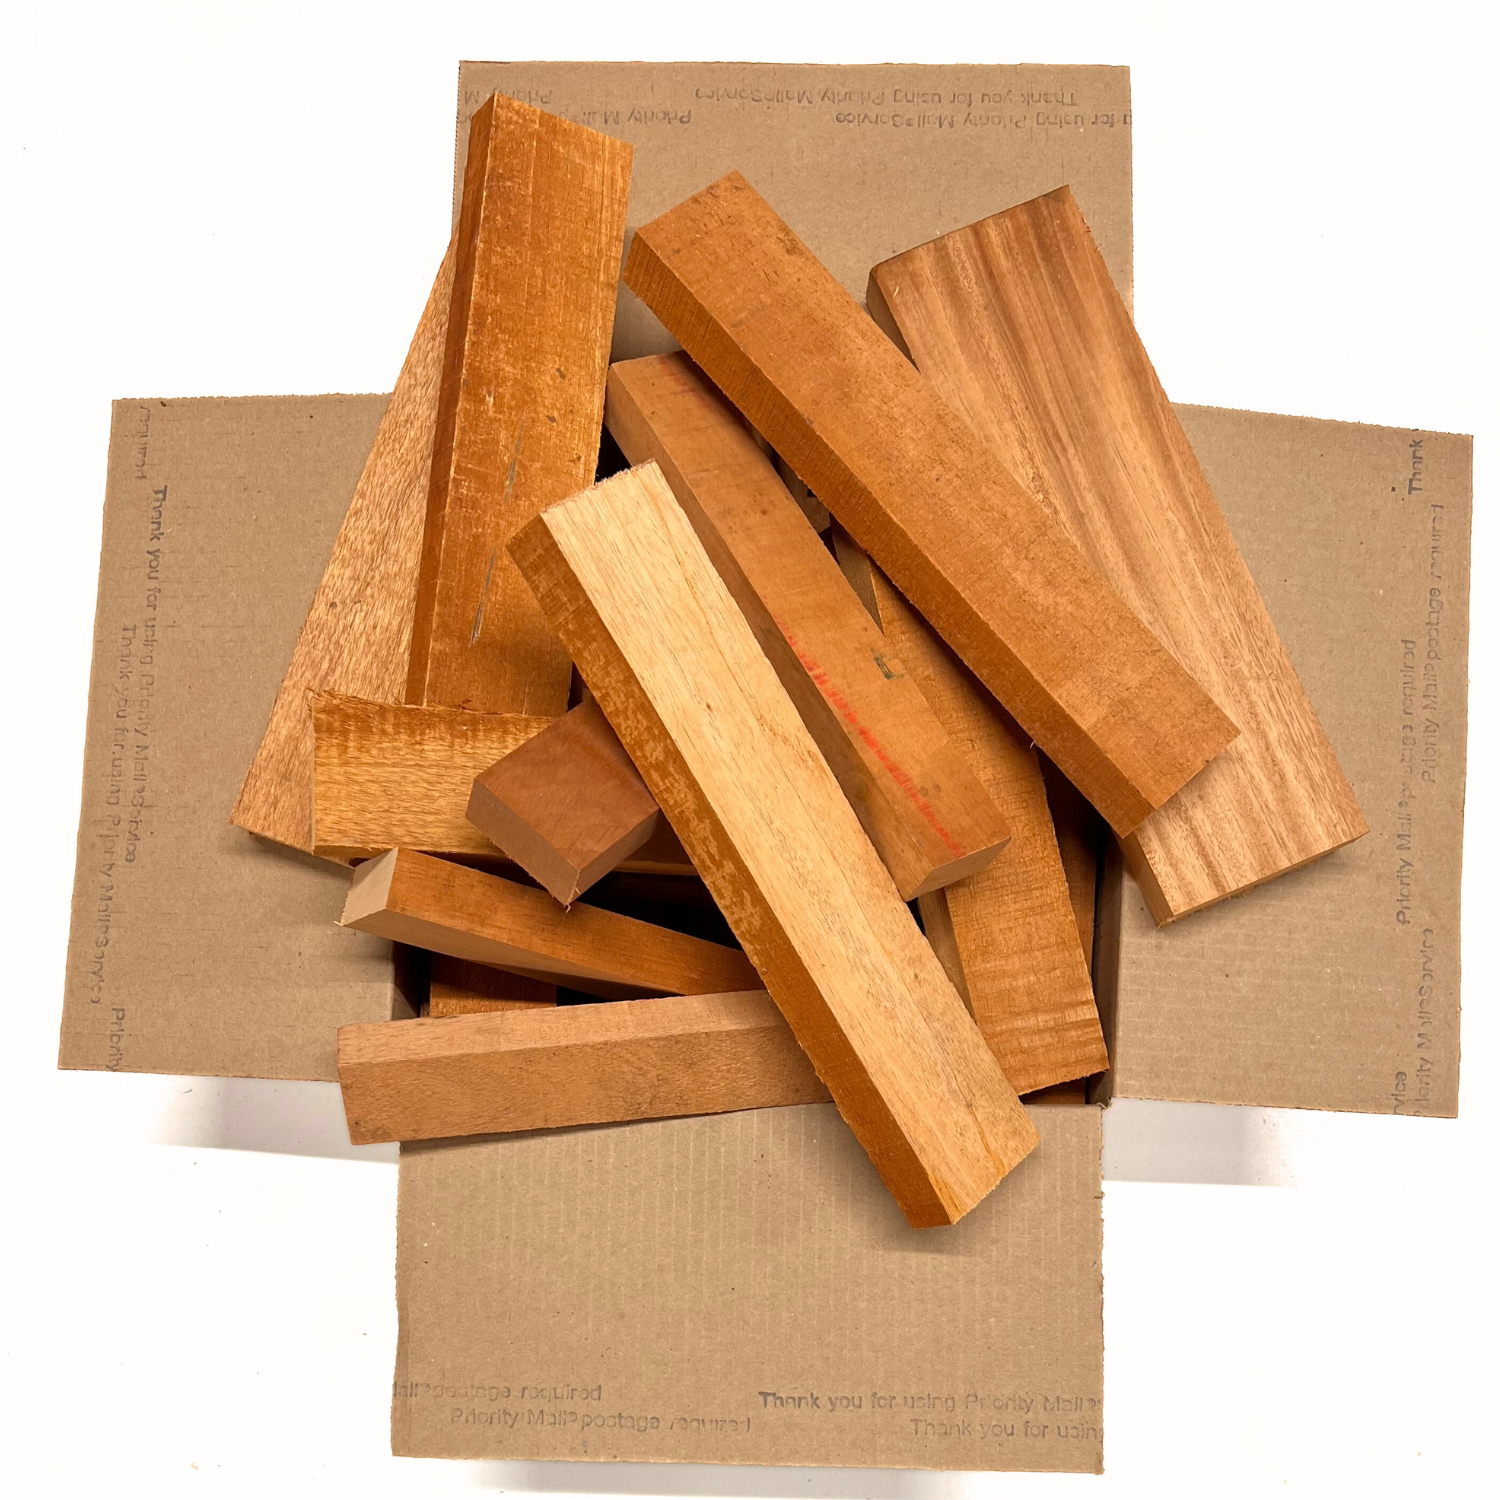 Wood Blanks, for Signs, Crafting, or Painting, Bulk Wood Blanks, Scrap